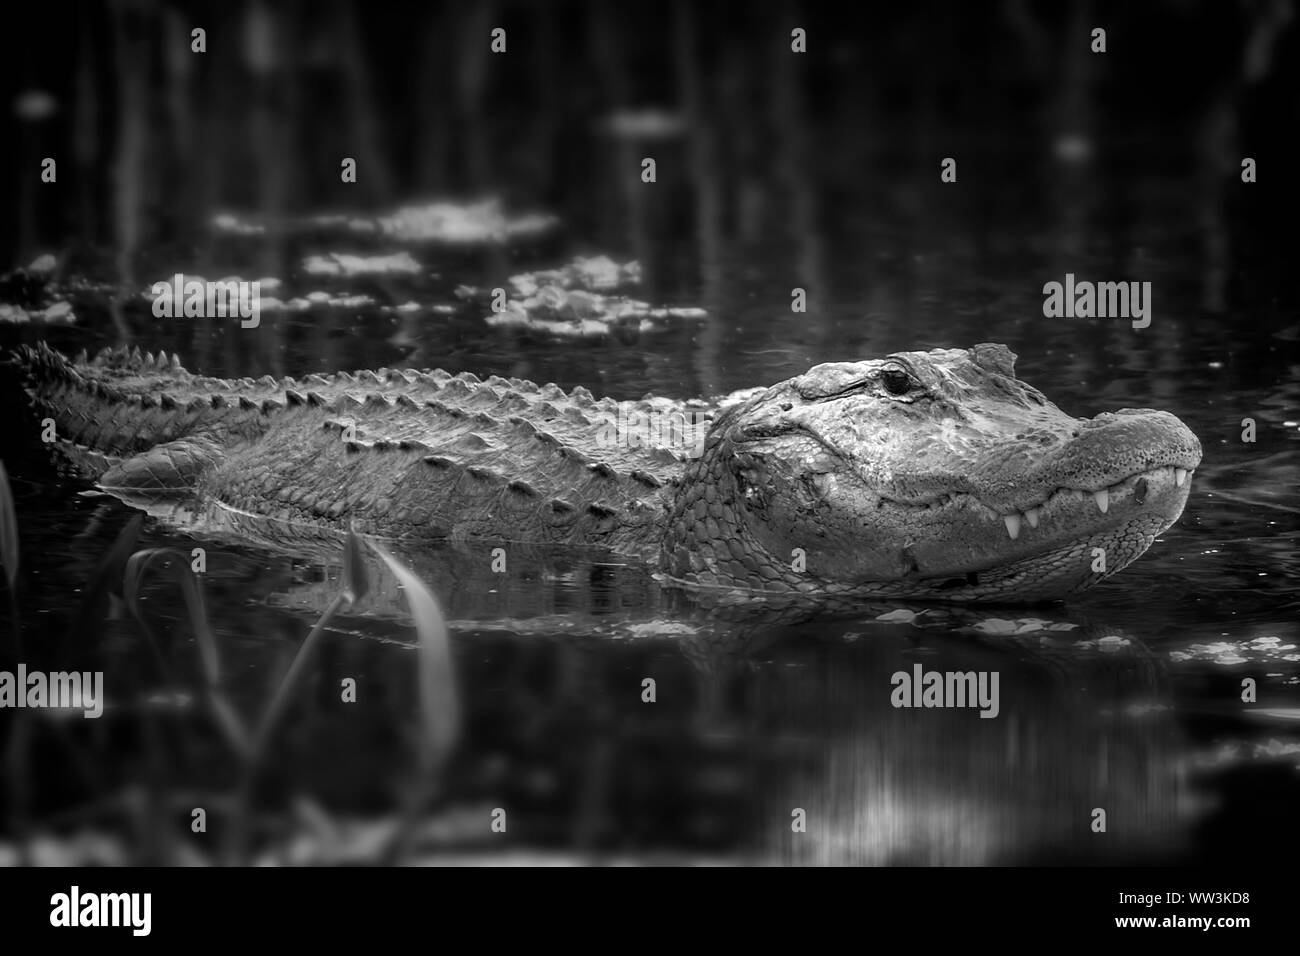 An American Alligator raises it's head out of the water in the Florida Everglades. Stock Photo